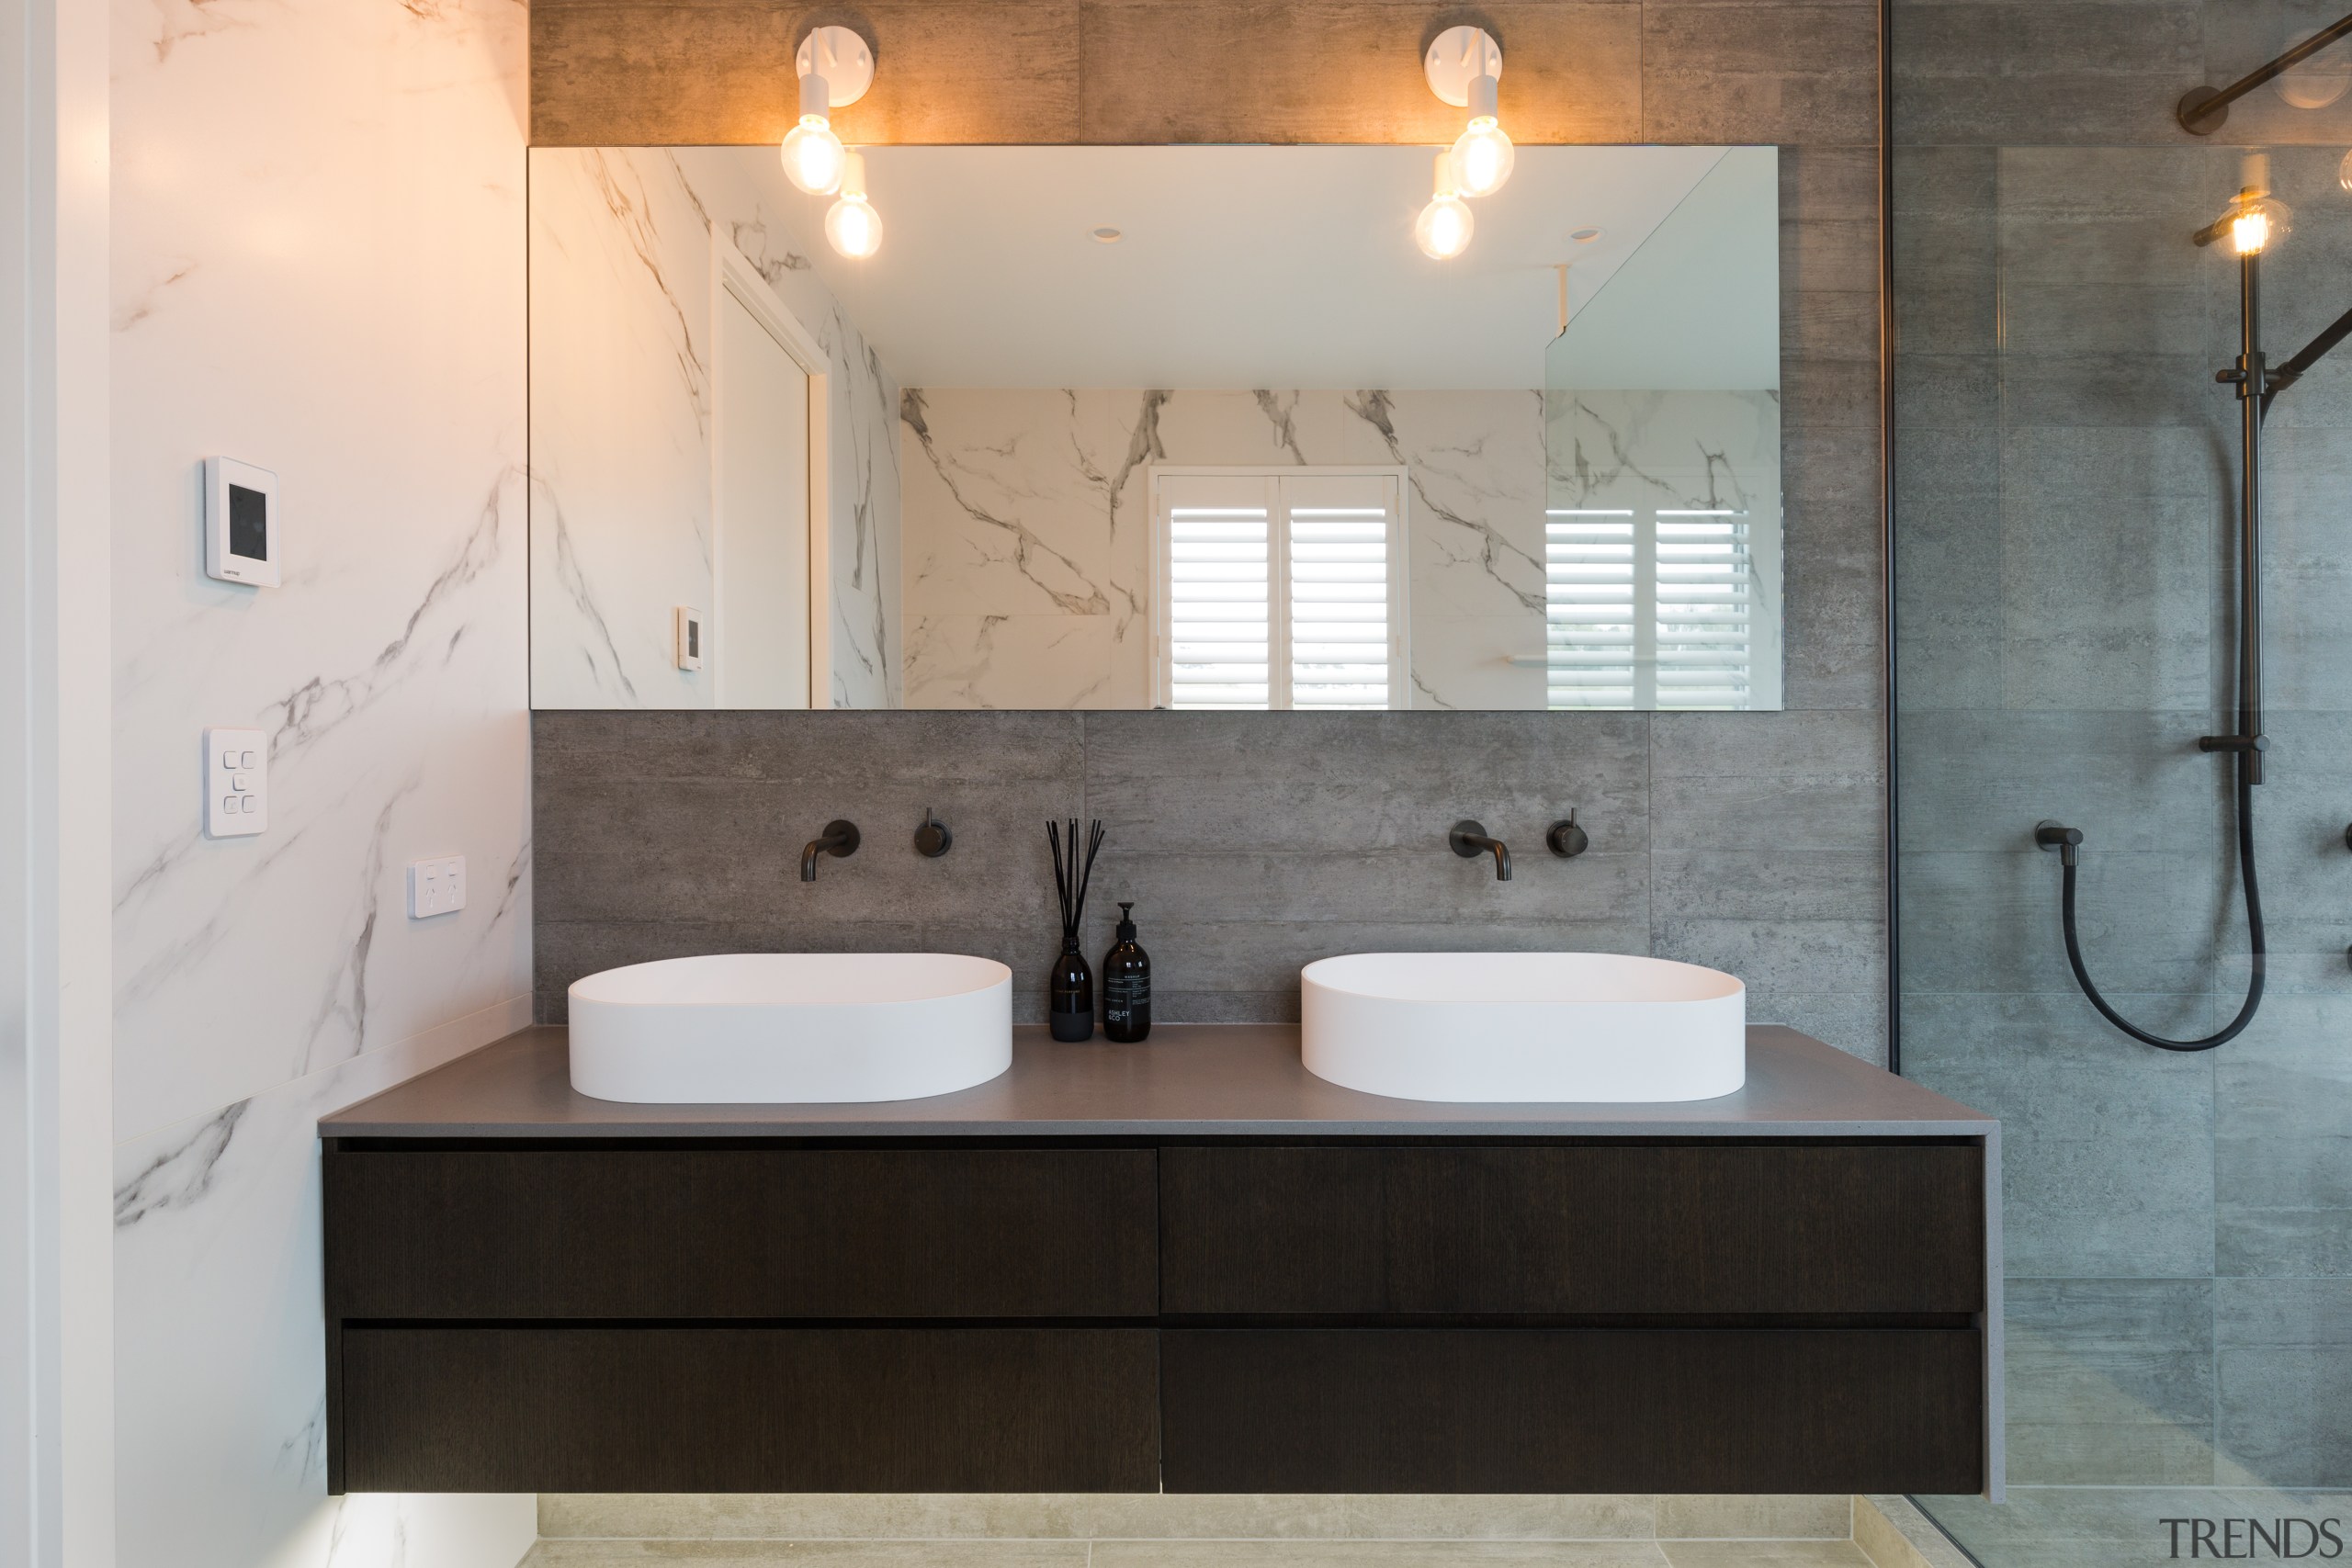 The owners wanted a luxury feel with an bathroom, bathroom accessory, ceramic, countertop, floor, home, interior design, plumbing fixture, room, sink, tap, tile, gray